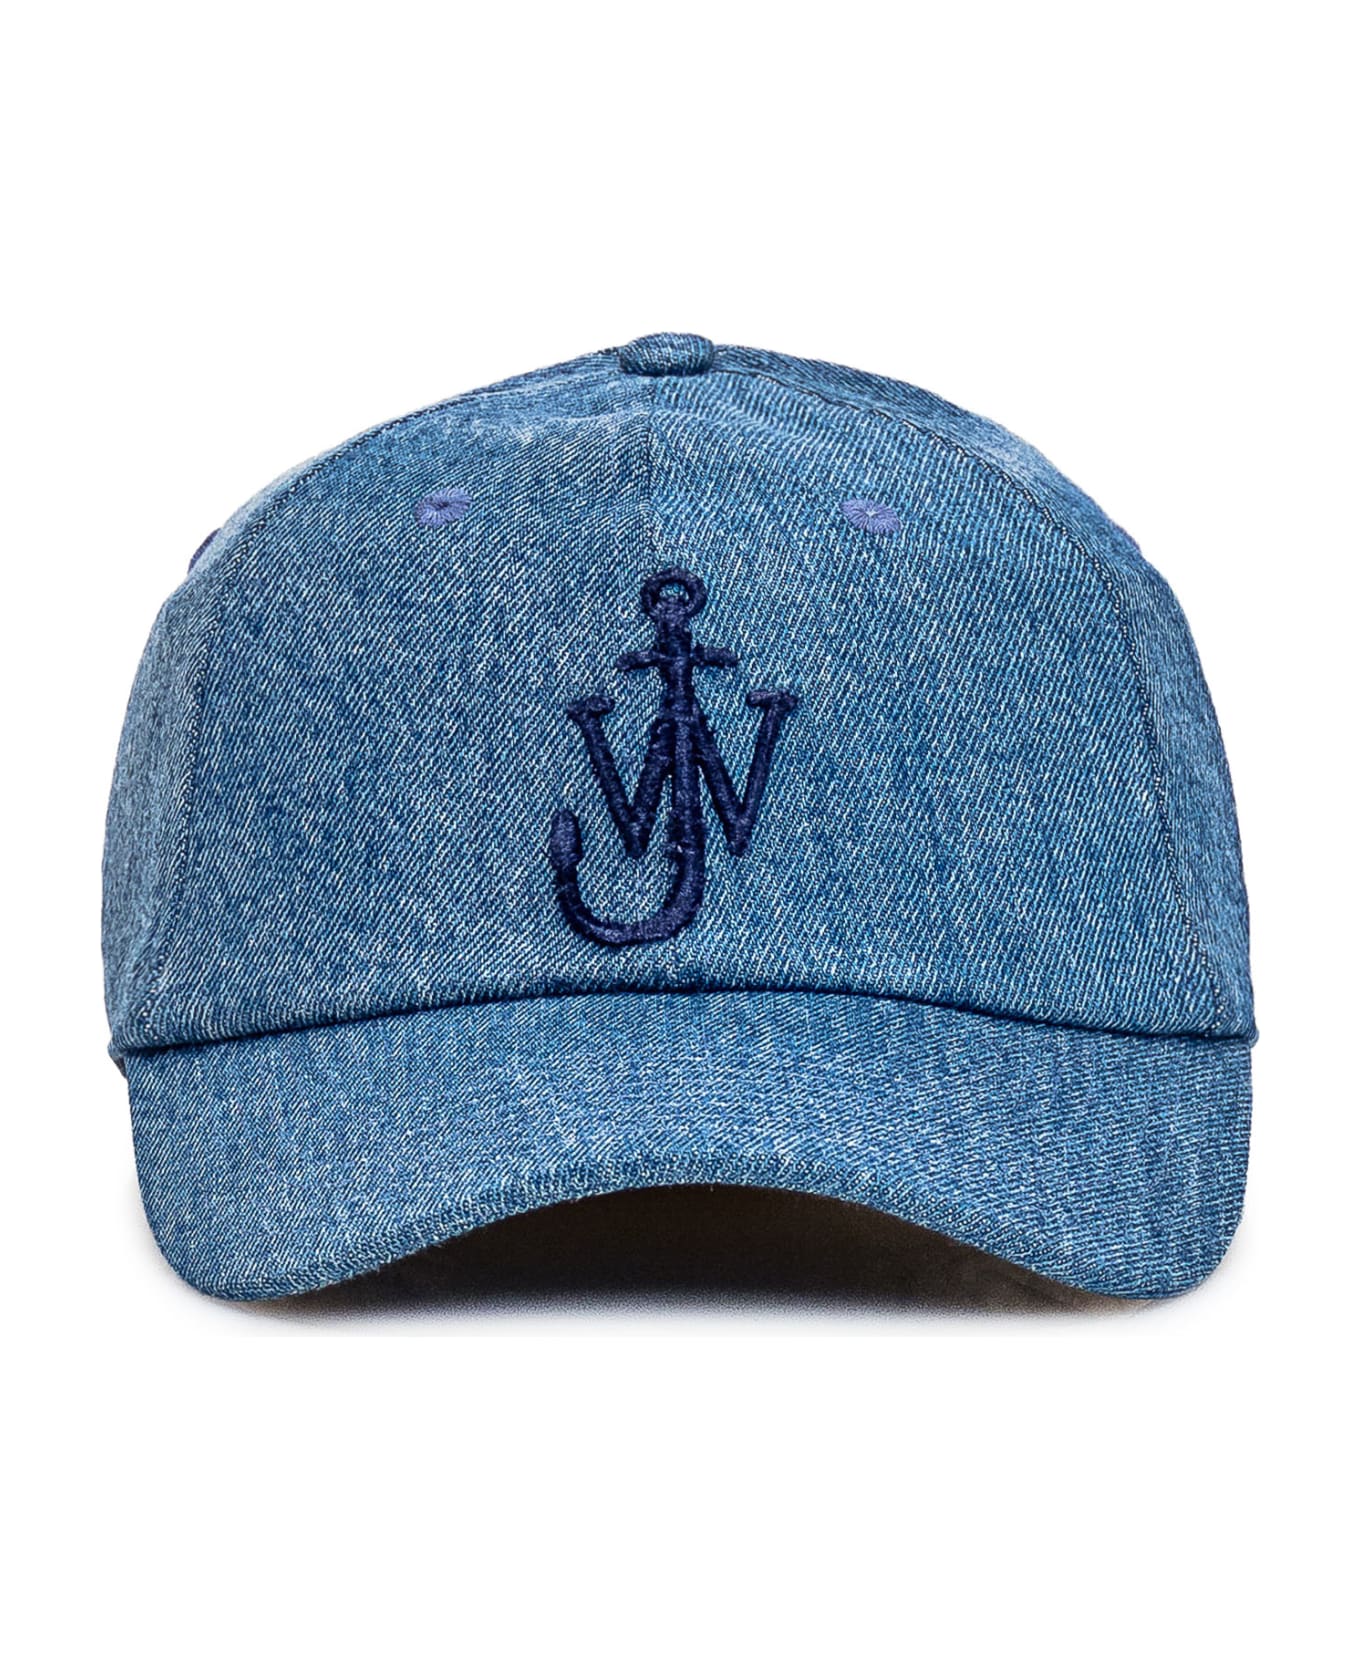 J.W. Anderson Logo Embroidered Baseball Cap - BLUE